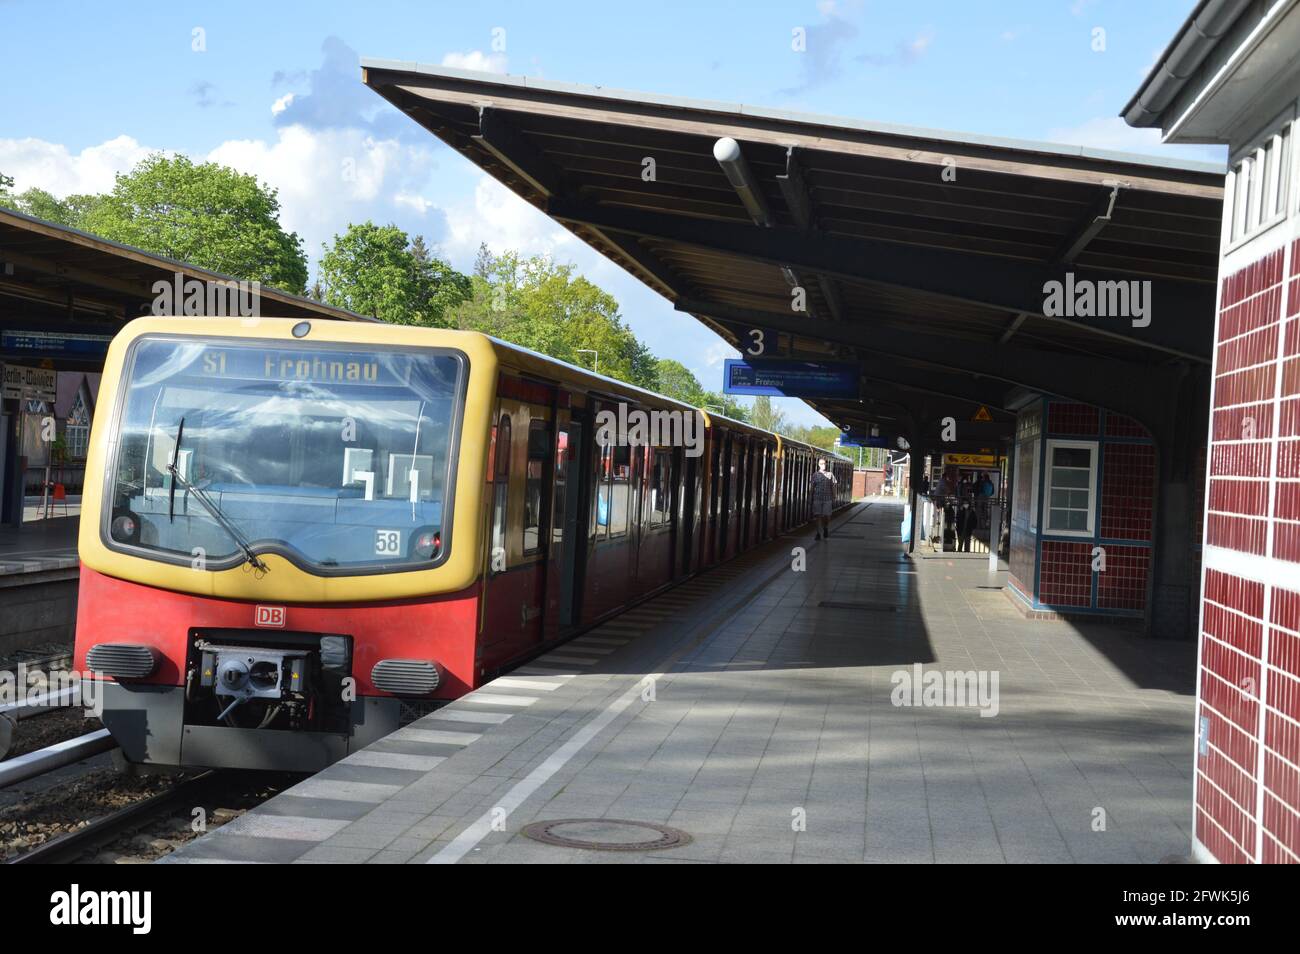 Berlin-Wannsee station - 21st May 2021. Stock Photo